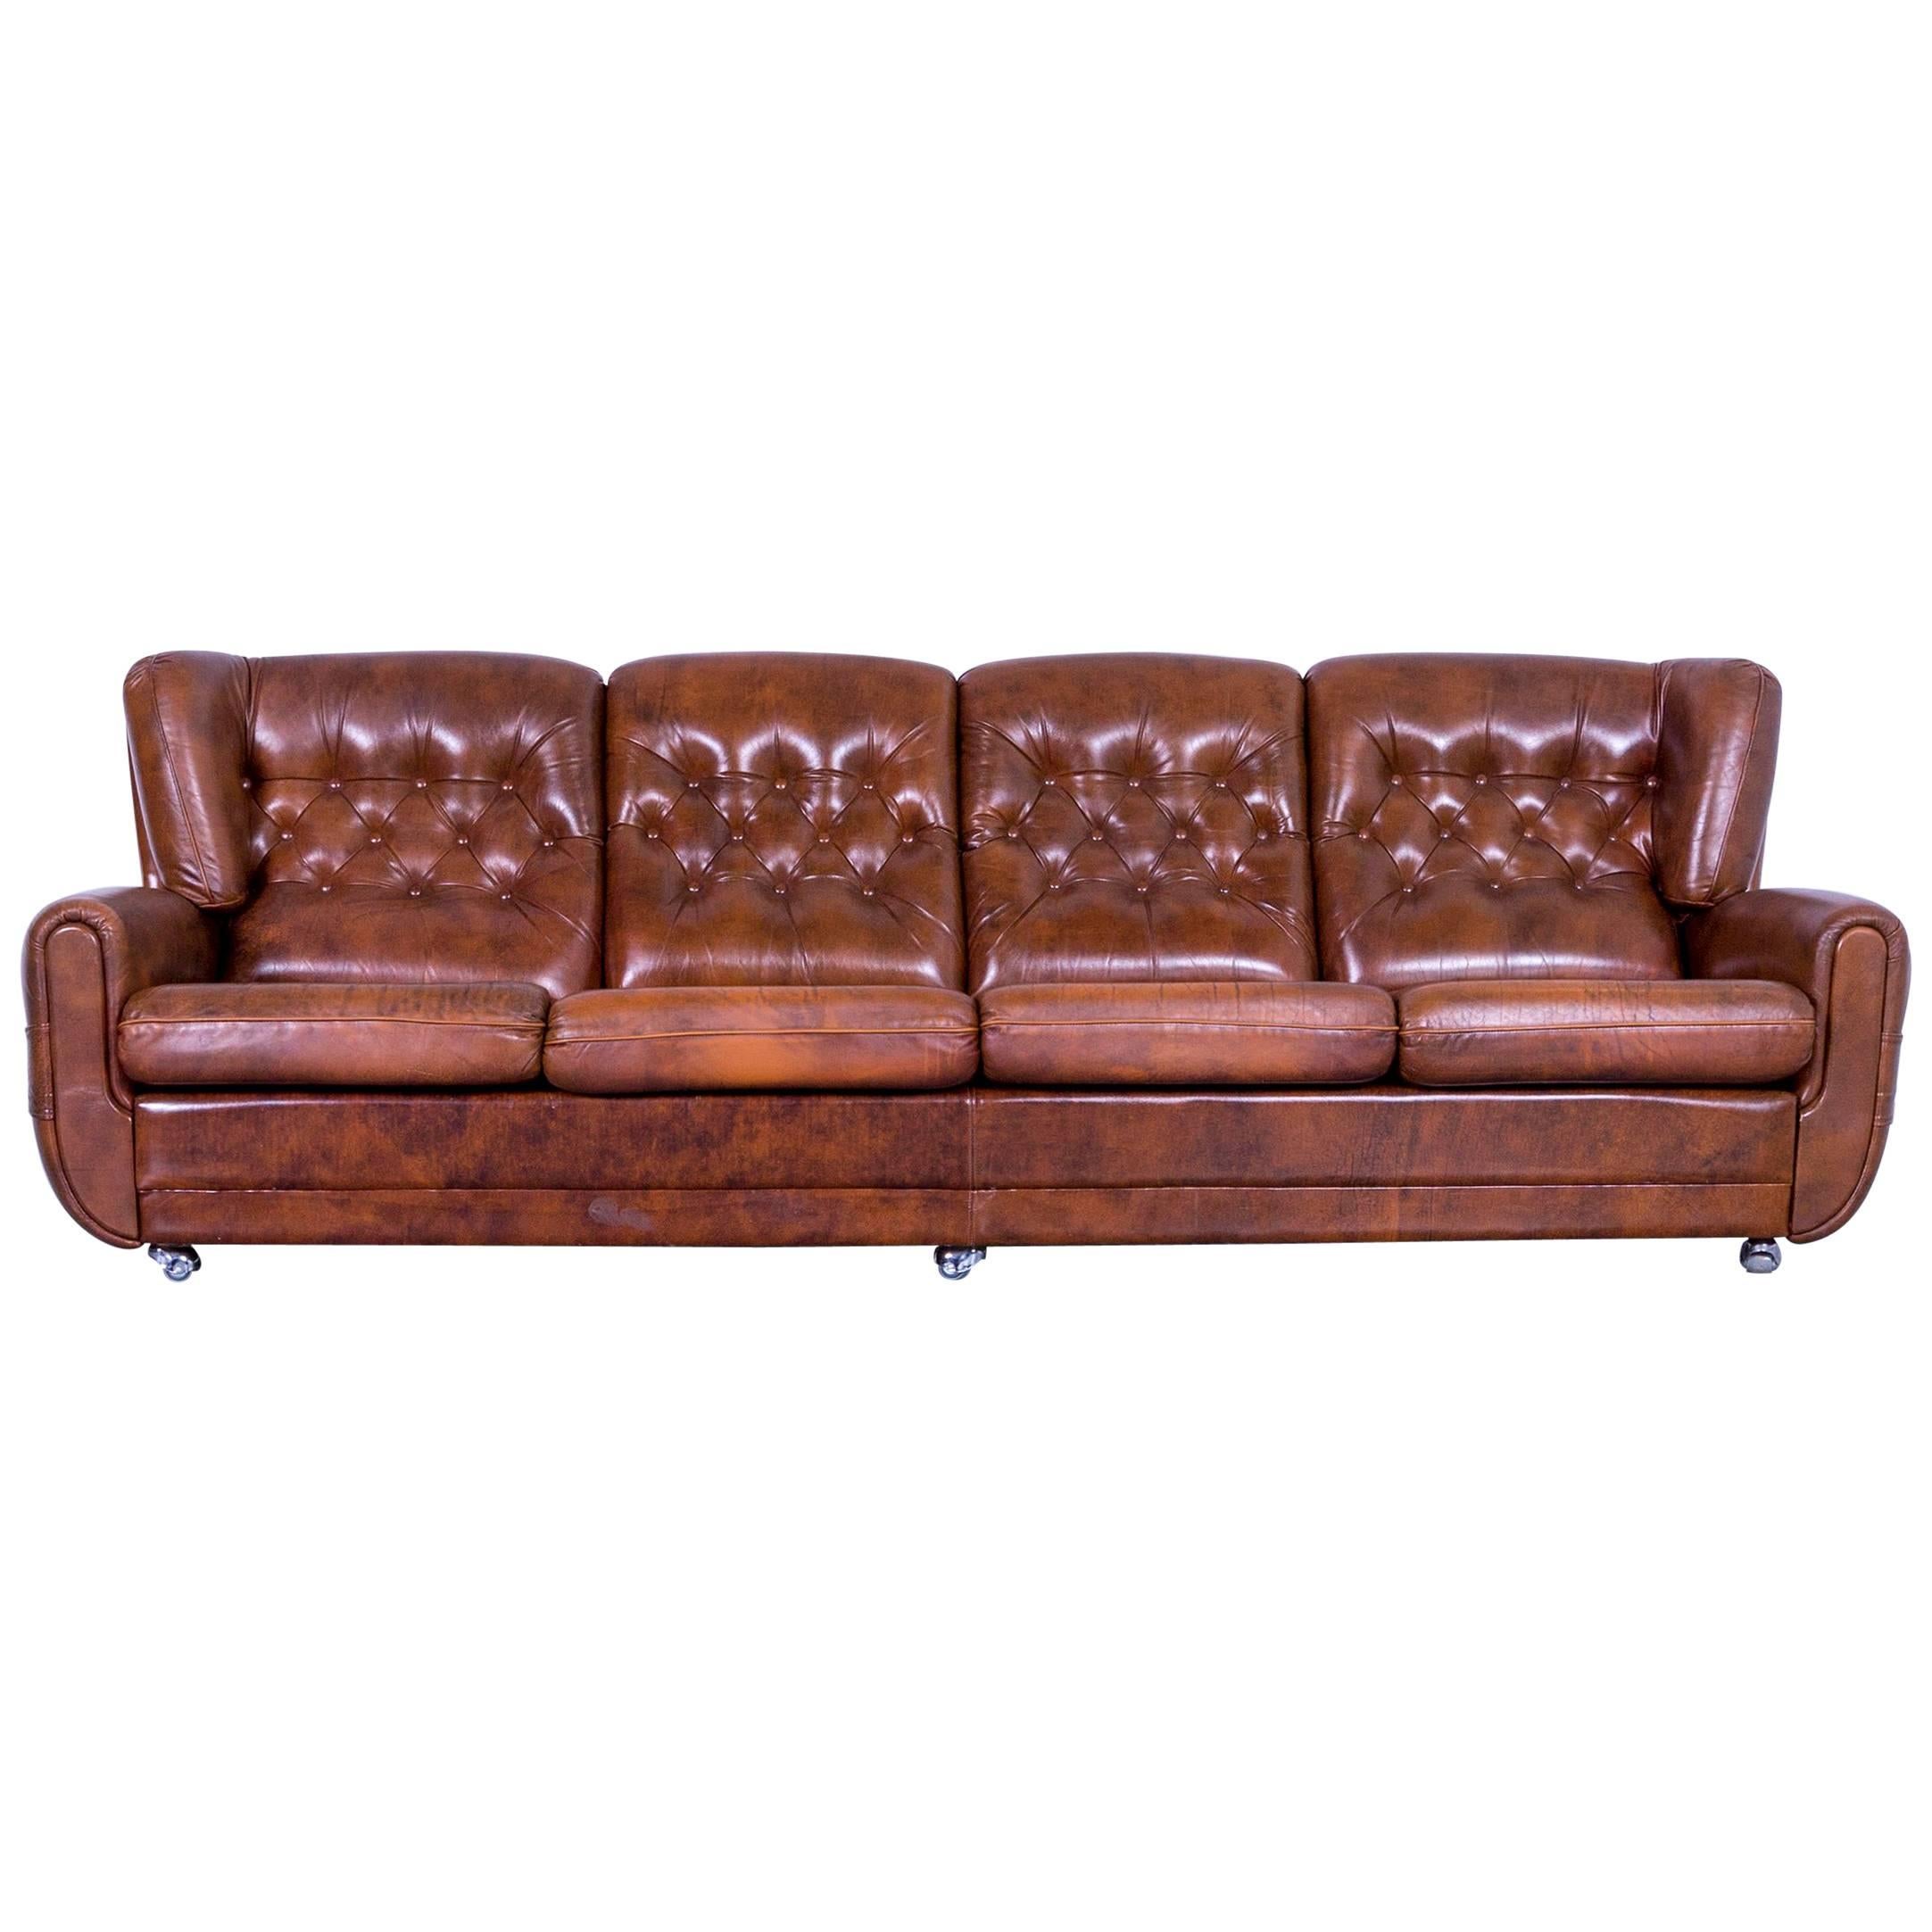 Chesterfield Leather Sofa Brown Four-Seater Couch Vintage